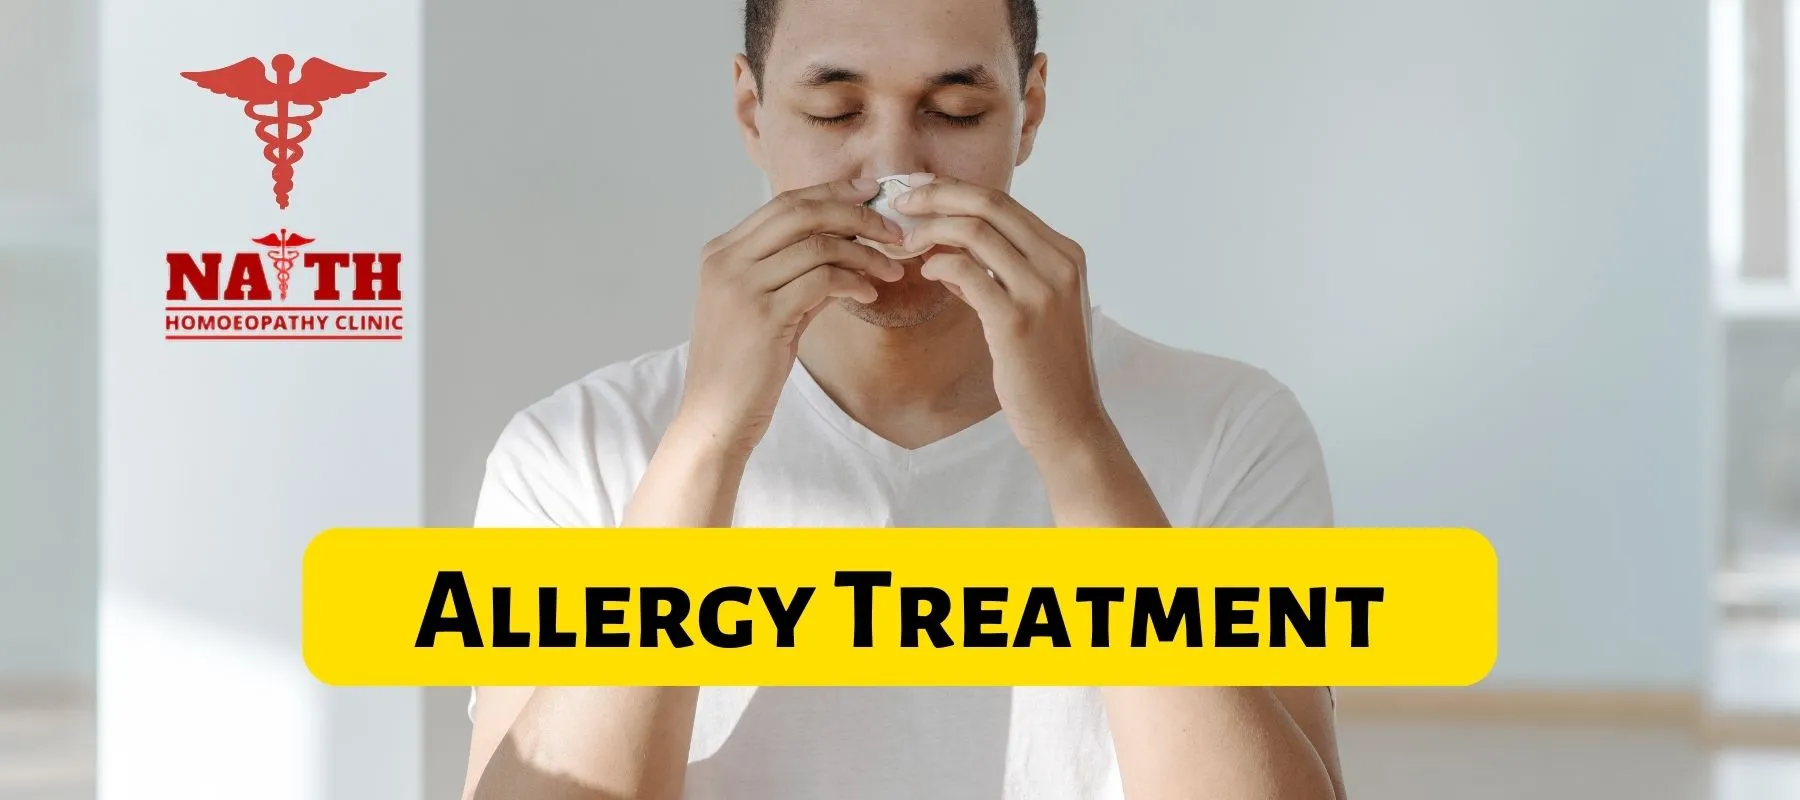 Homeopathic Remedies for Allergies